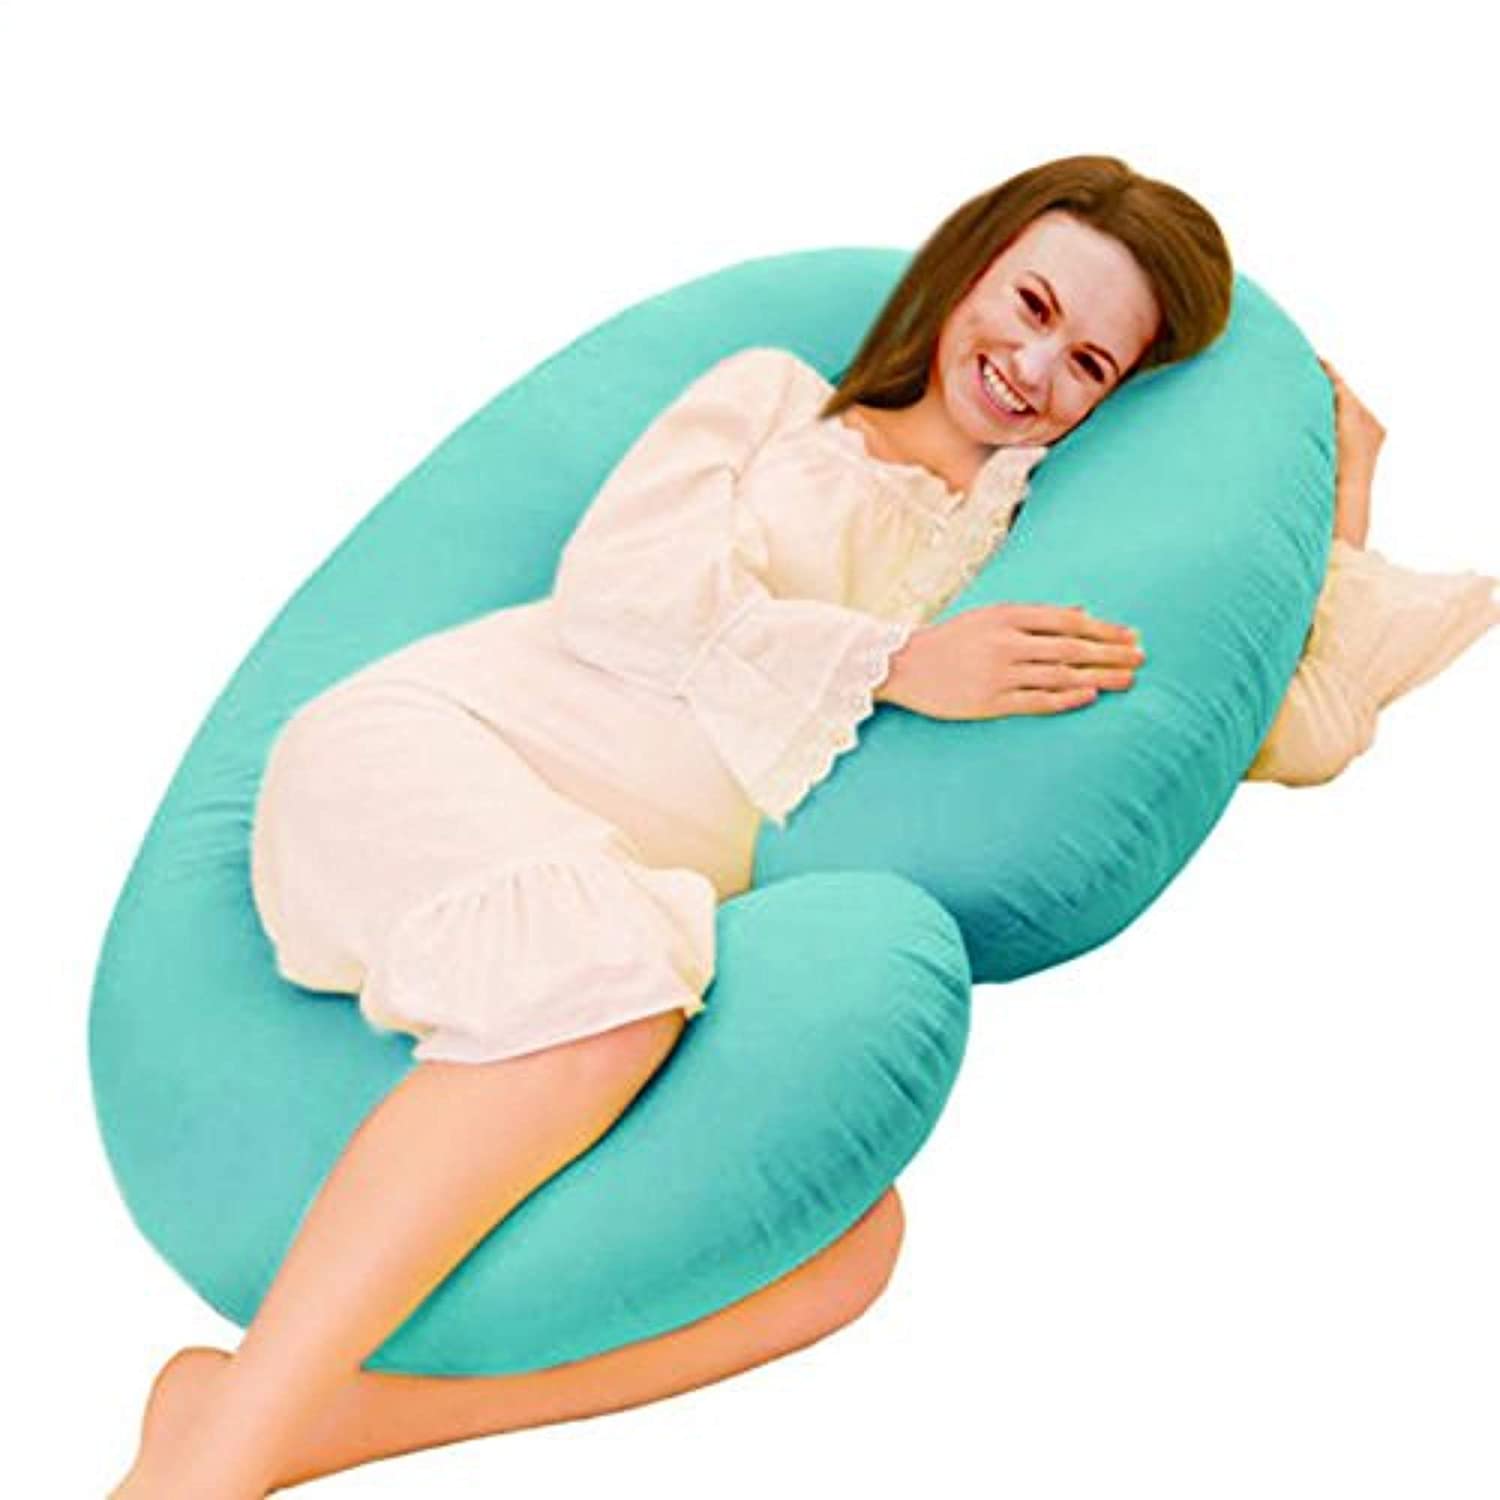 coozly-premium-lyte-c-shaped-pregnancy-pillow